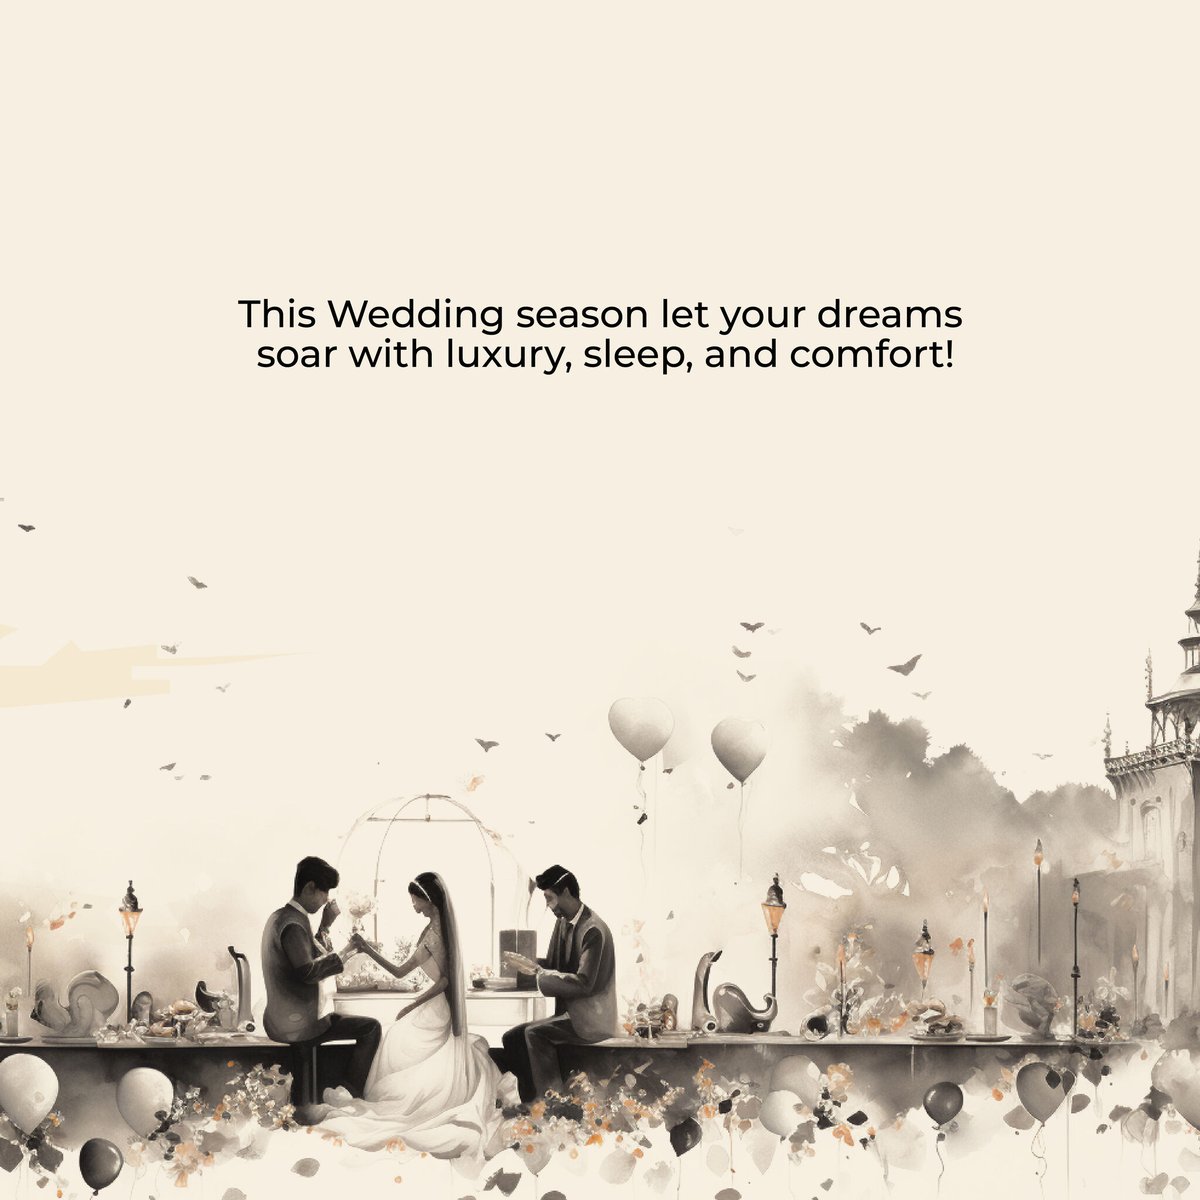 The season of love, weddings, festivities, and celebrations is here - Come together to make the dream come true. From the colour selection to the best of fabrics, we know you care about intricate things. Stay tuned to this space to know more! #weddingseason #mattress